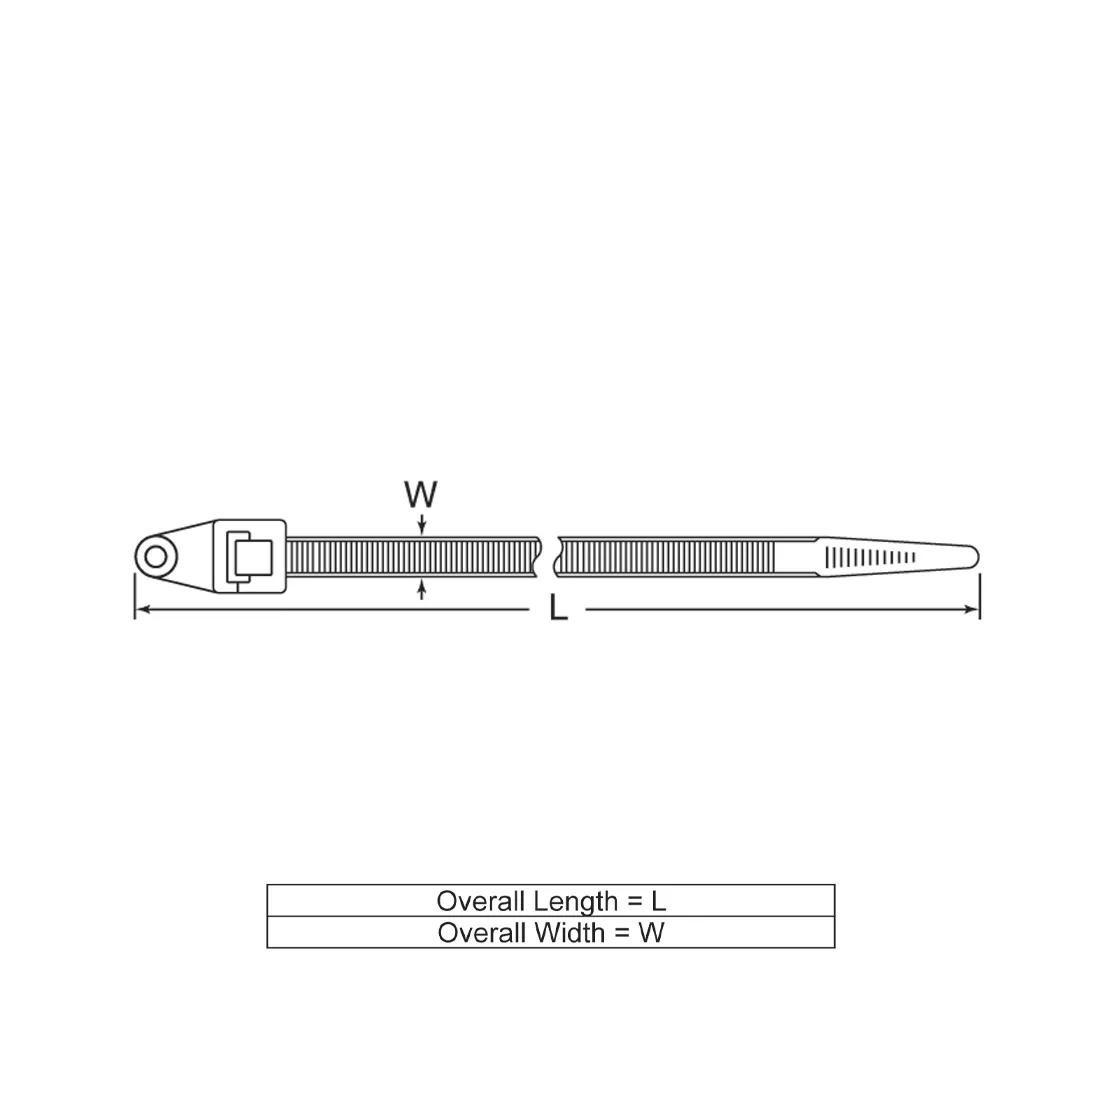 P110410 Mounting Cable Ties - Screw - Line Drawing